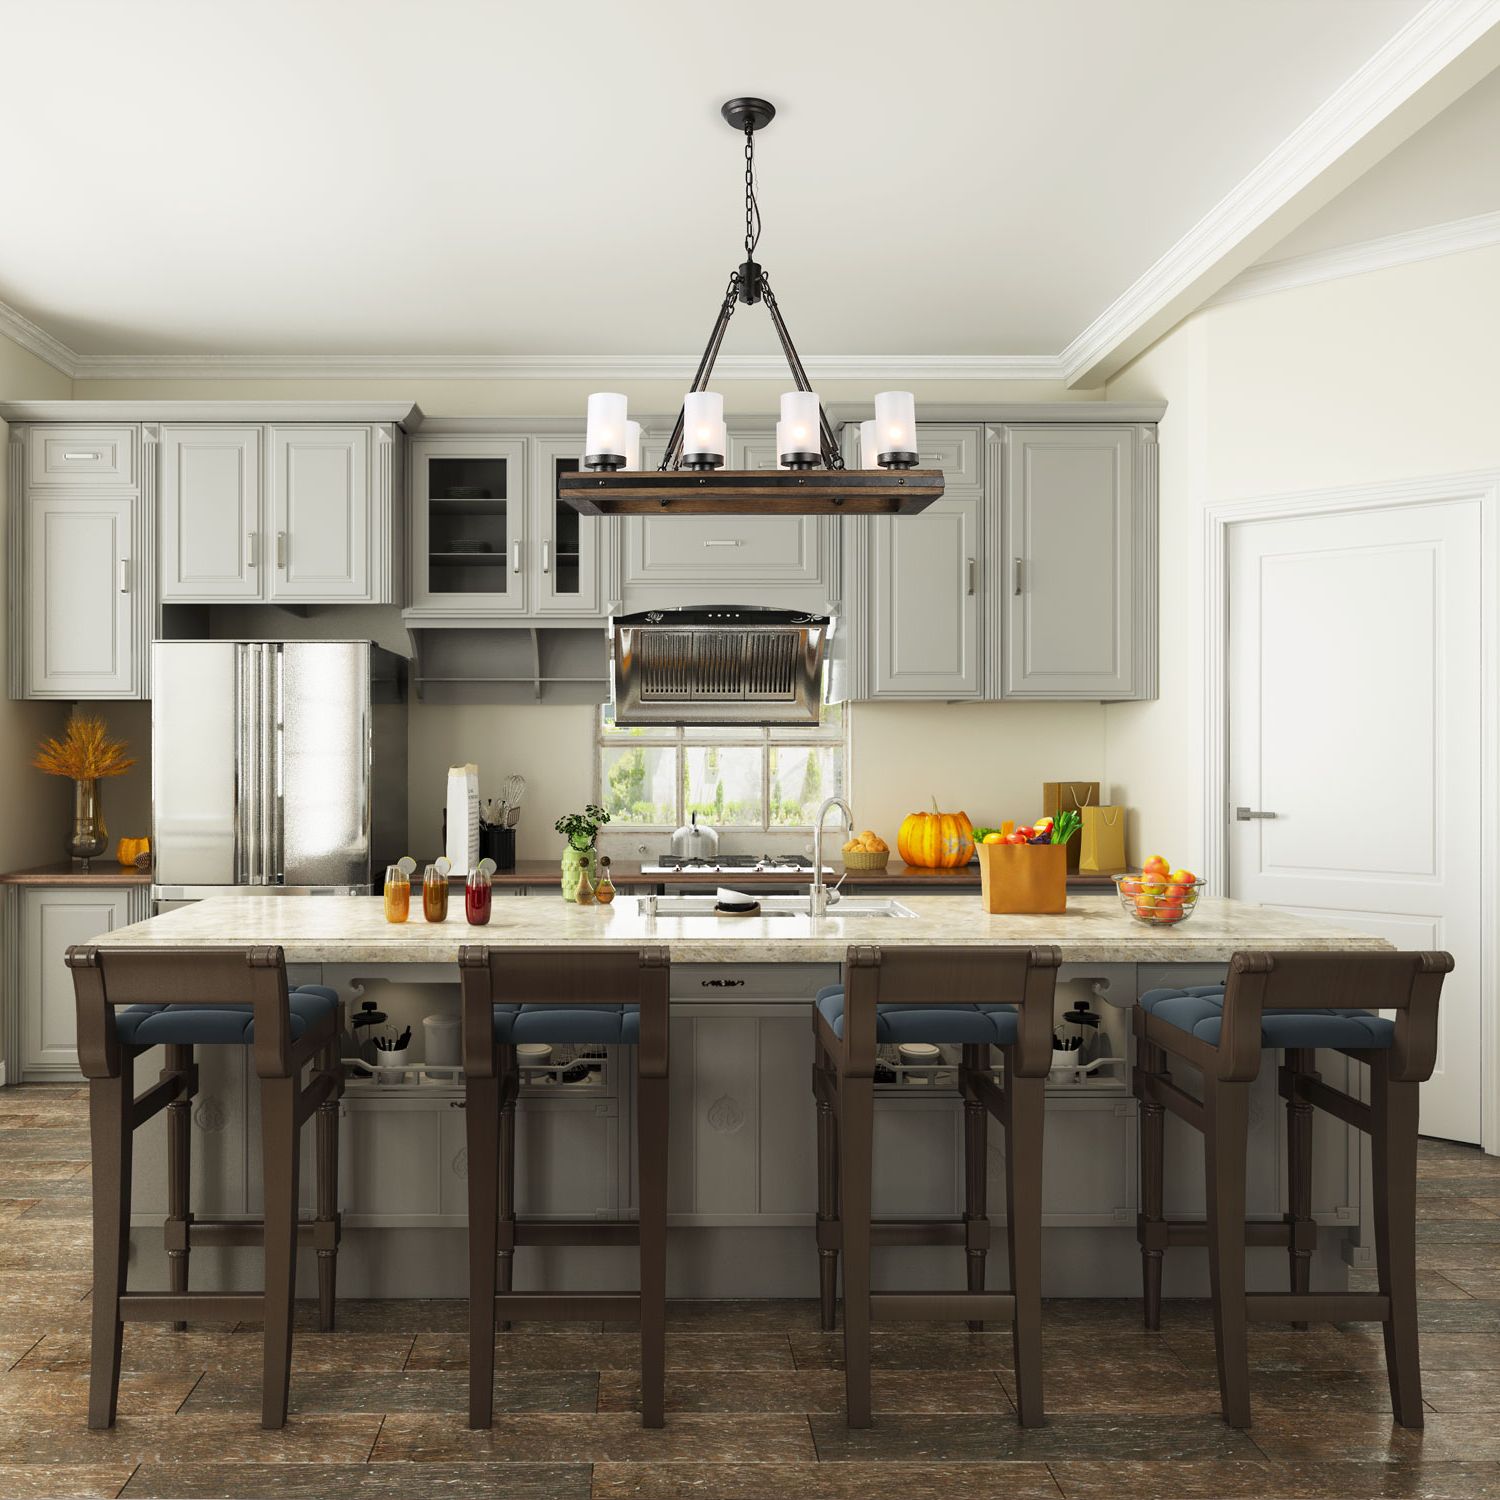 Kitchen Island Light Chandeliers Within Most Popular Lnc Kitchen Island Pendant Lights, 8 Lights Rustic (View 3 of 15)